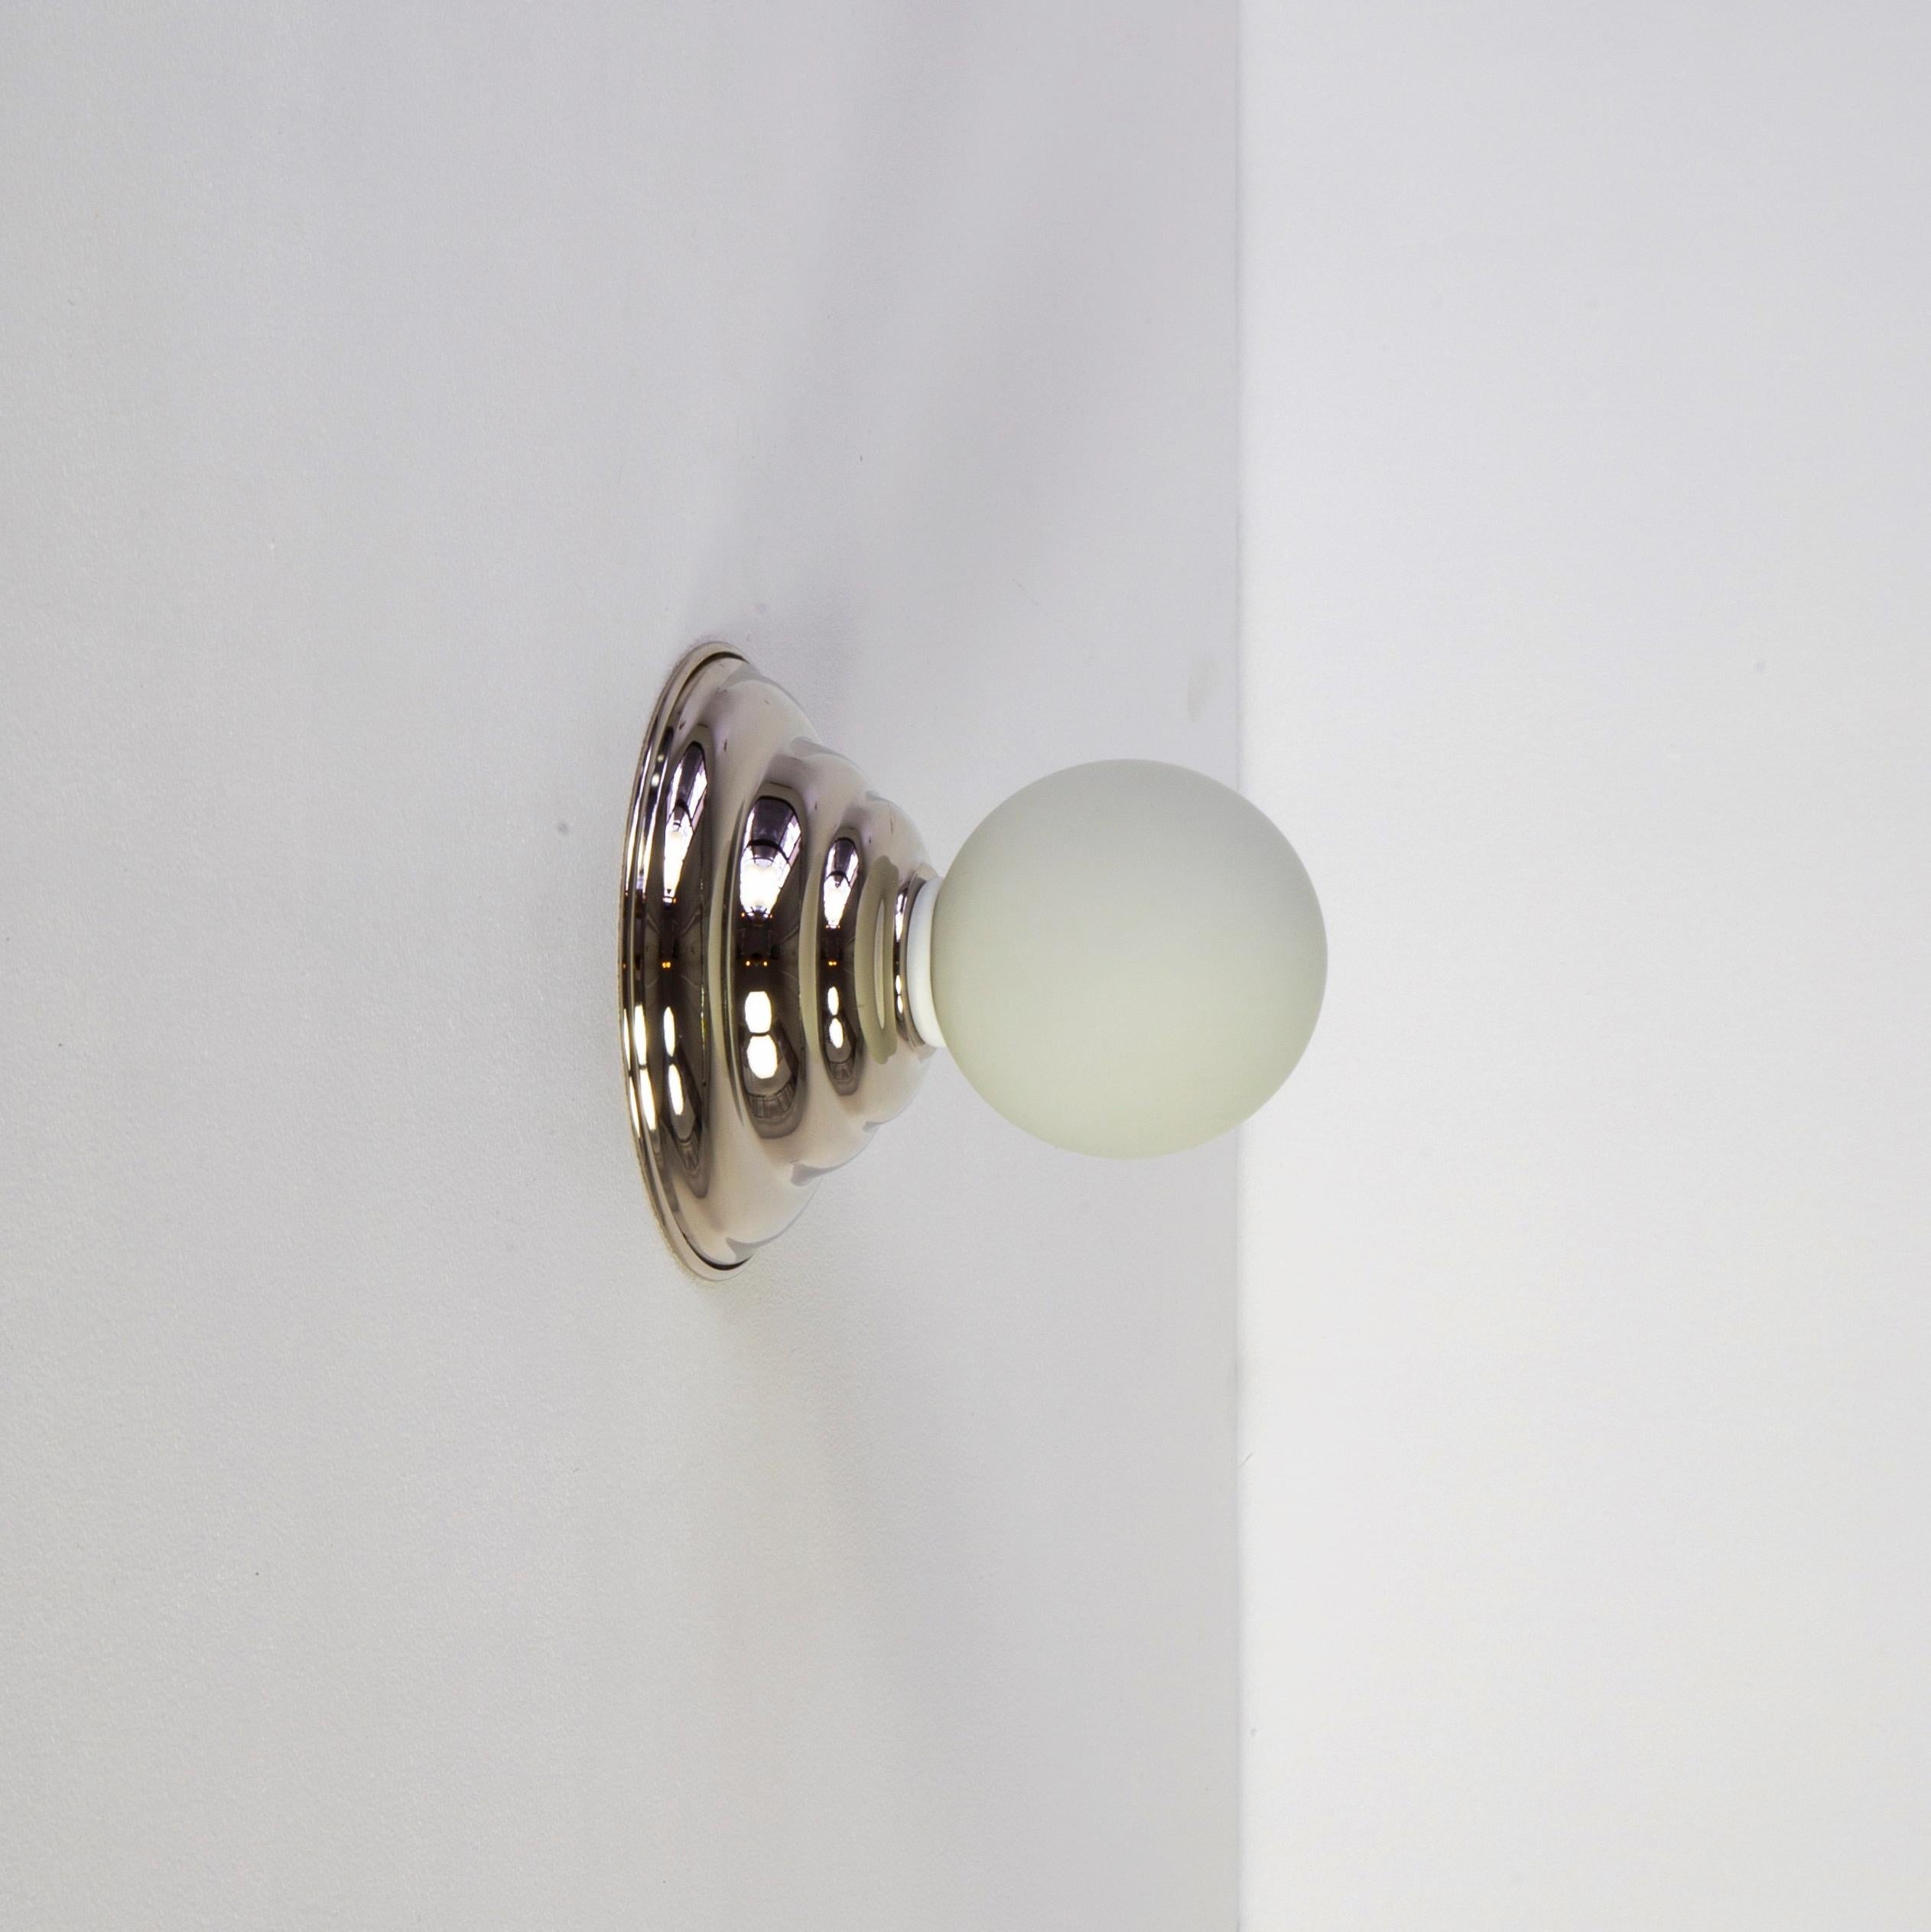 American Pair of Hive Sconces by Research.Lighting, Polished Nickel, In Stock For Sale